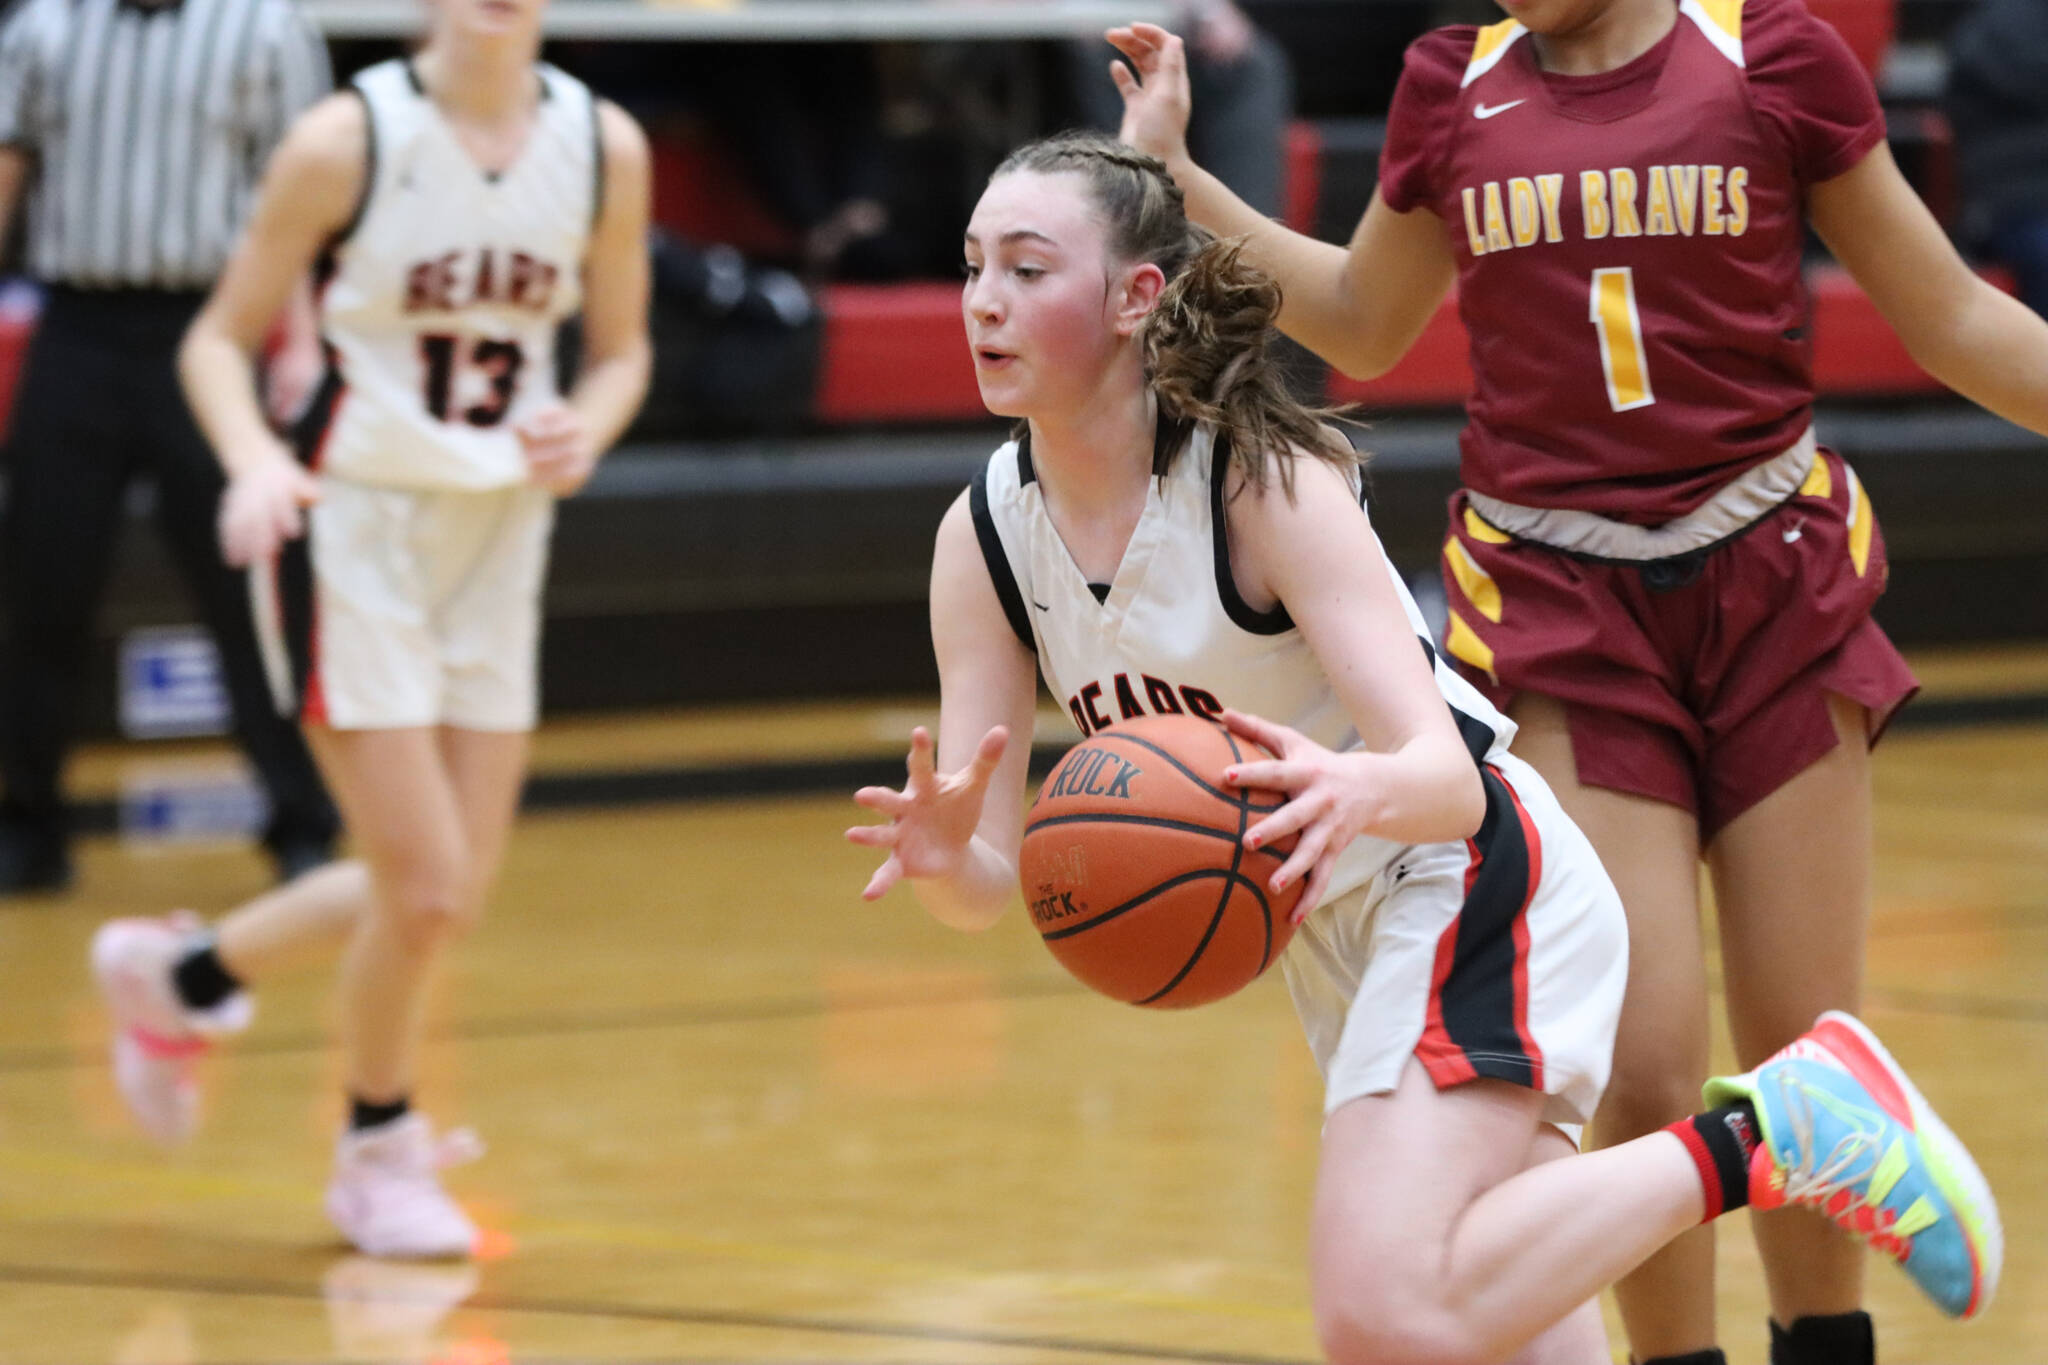 JDHS freshman Gwen Nizich drives the lane for a 2-point shot on Saturday in the second game against Mt. Edgecumbe at home. Nizich finished with a total of 11 points. (Jonson Kuhn / Juneau Empire)